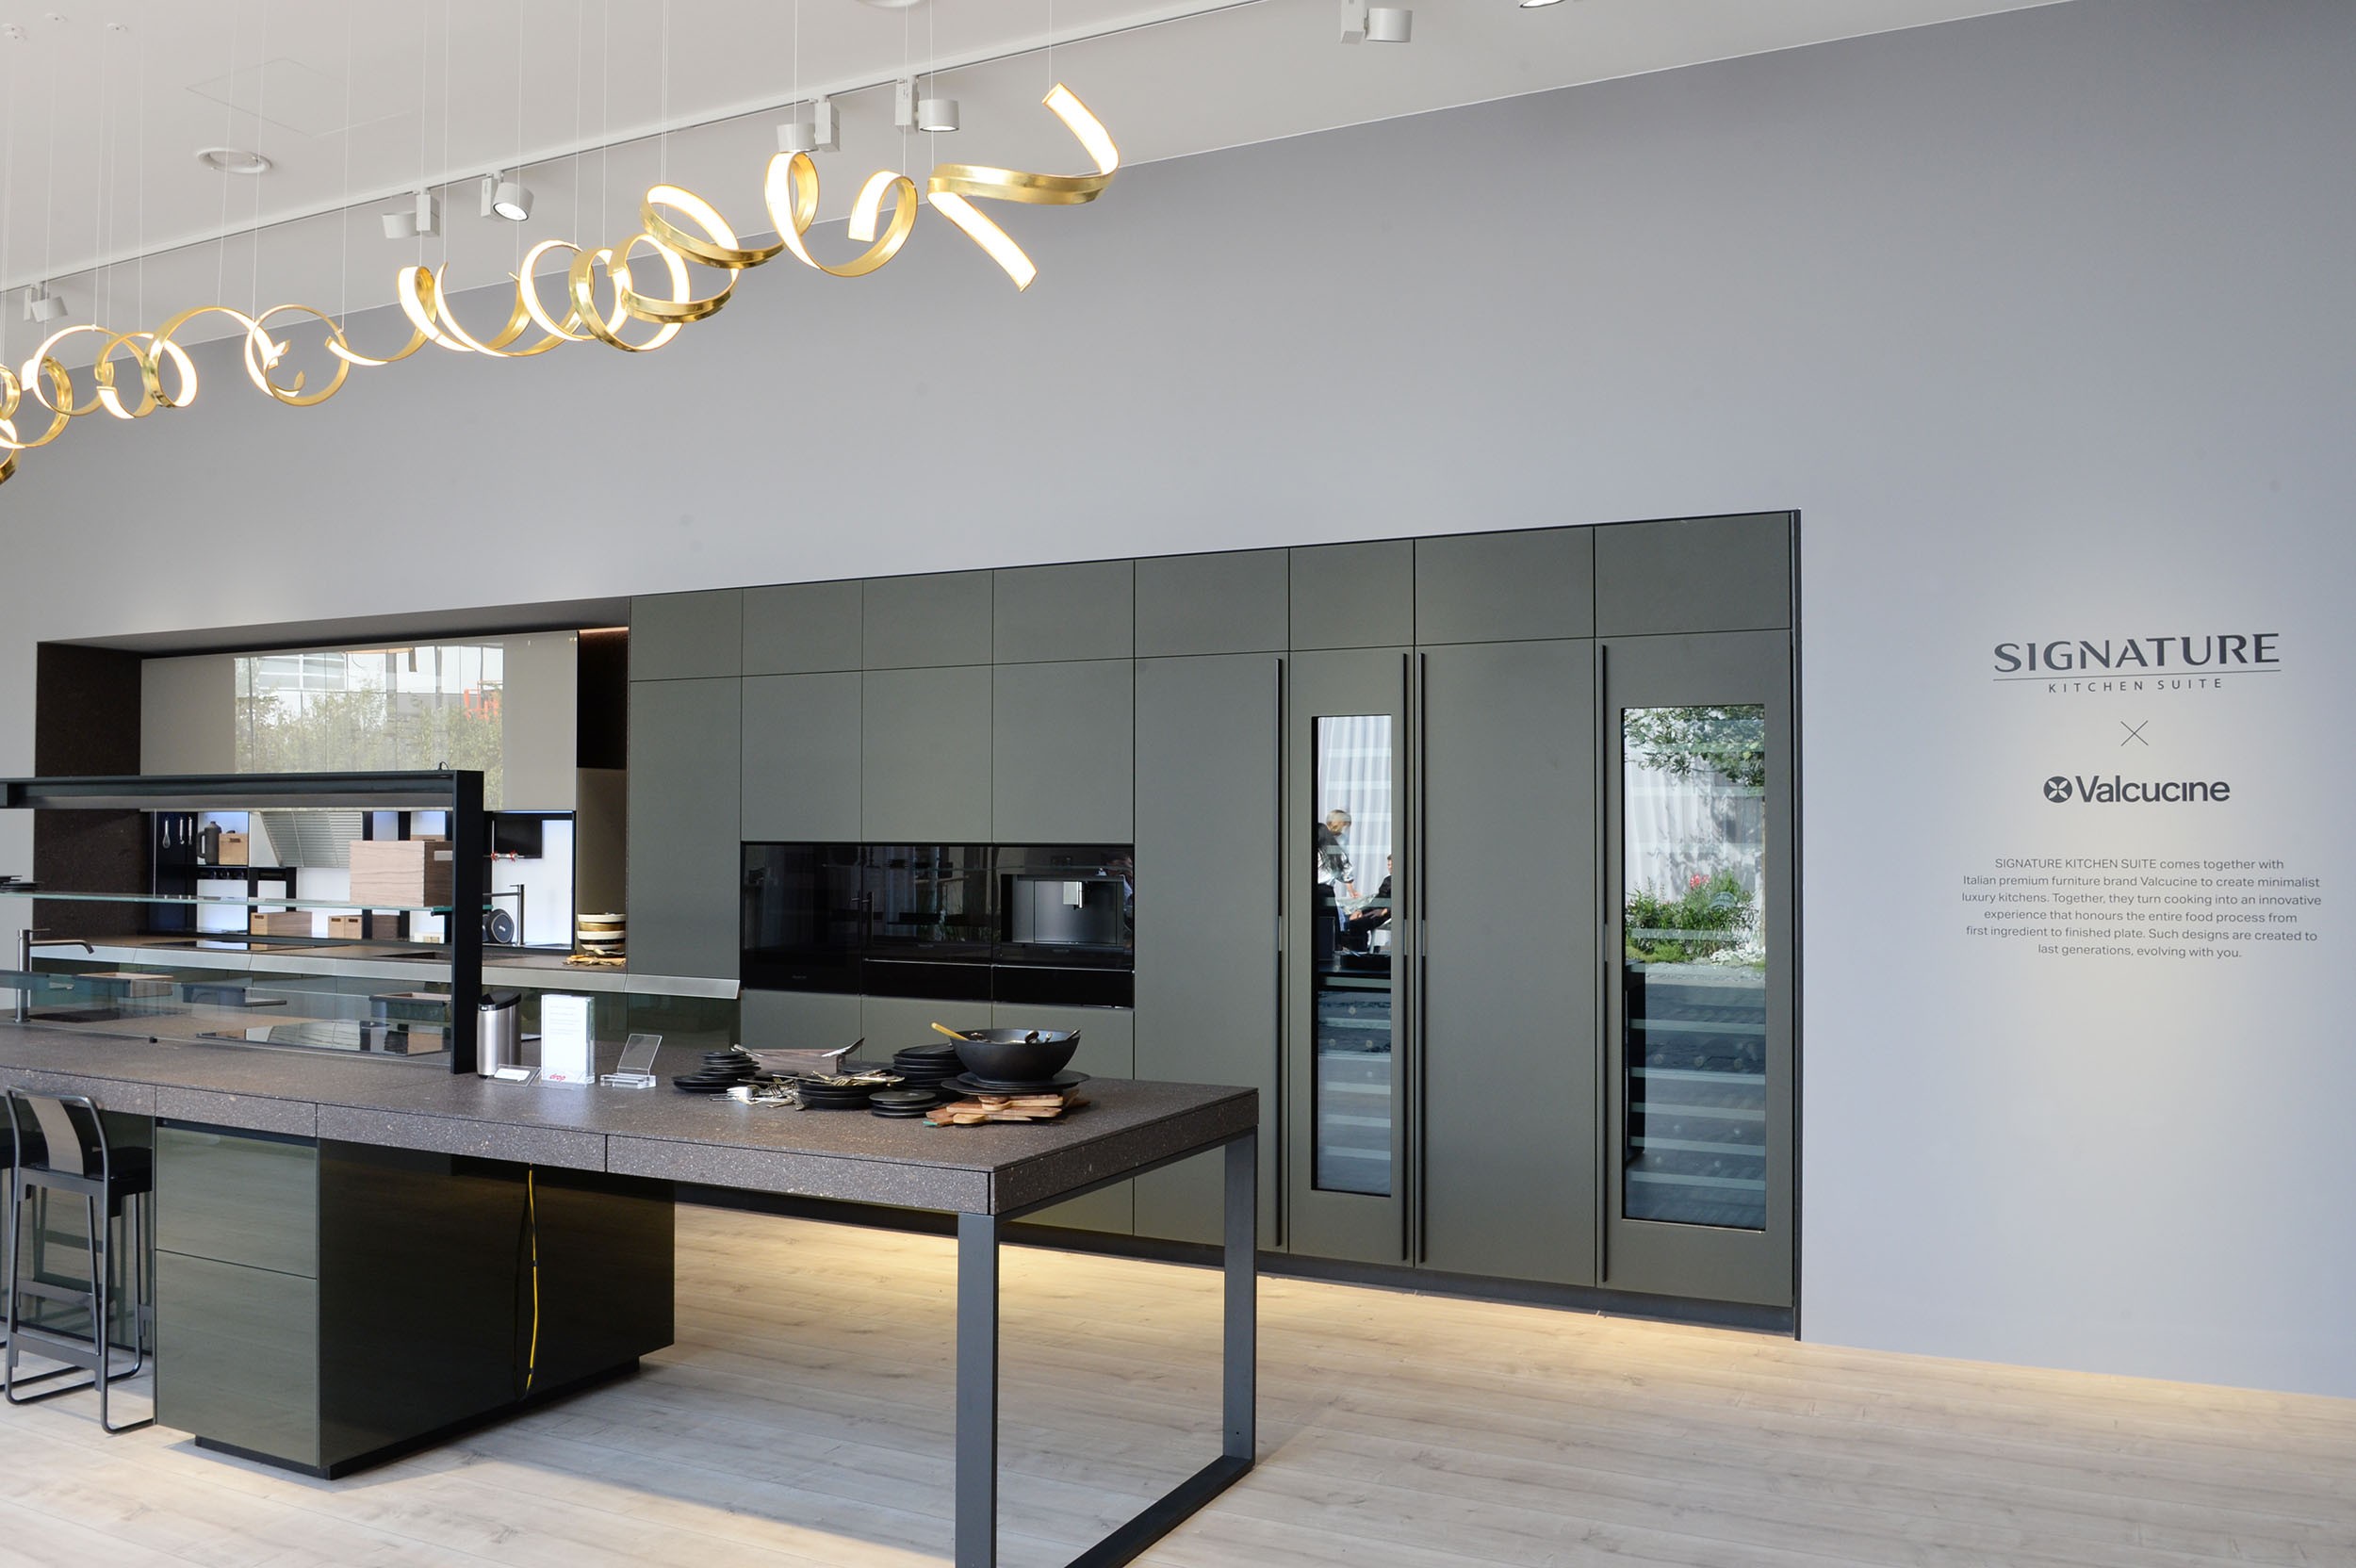 Portion of SIGNATURE KITCHEN SUITE’s exhibition hall cooperated with Valcucine at IFA 2018